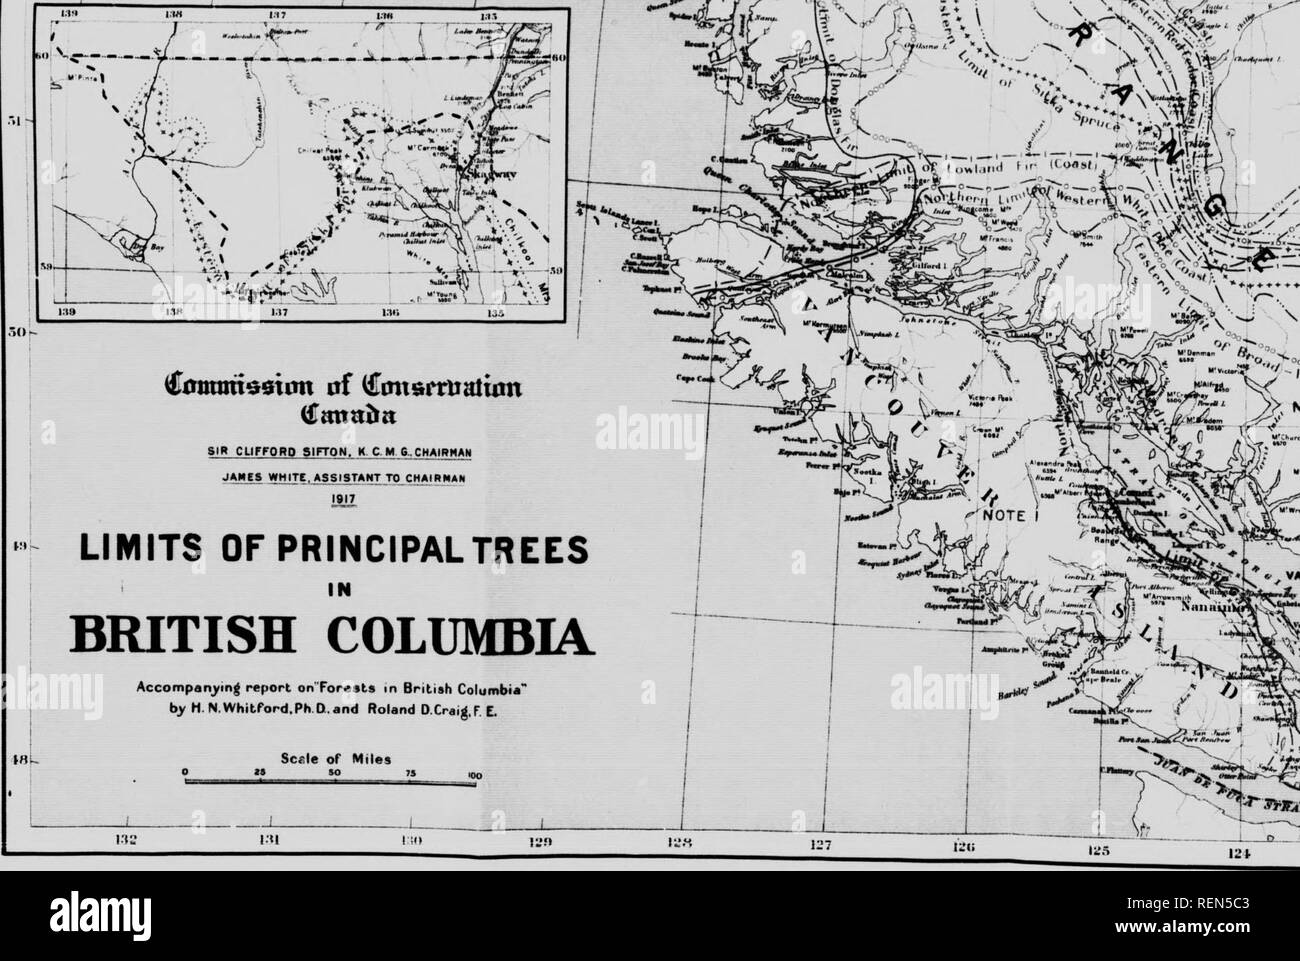 . Forests of British Columbia [microform]. Forests and forestry; ForÃªts. ri( â ixric I n^ 'â¢â¢.Â»Â»., ,-&gt;.',;  -J4,.. - , '^- - 1 /' ' &quot;â¢ ^^ ^H|r,. 11, â l|.Â«.|- i^ 1^' â .*,., -V^^ â r &quot;&quot;'' O^ . SU^^ ^:^^ SS, '.aR -X ^-  â¢ -^ f Â« :. &lt;S^7-&quot; '*-w-^.. -l*''&quot;' H.ivalj '  &lt;&quot; NUnrf r' ,J,'; '^ ' -- /....3r. 't /;' &quot;'&quot;&quot;'^''&quot;^p. Please note that these images are extracted from scanned page images that may have been digitally enhanced for readability - coloration and appearance of these illustrations may not perfectly resemble th Stock Photo